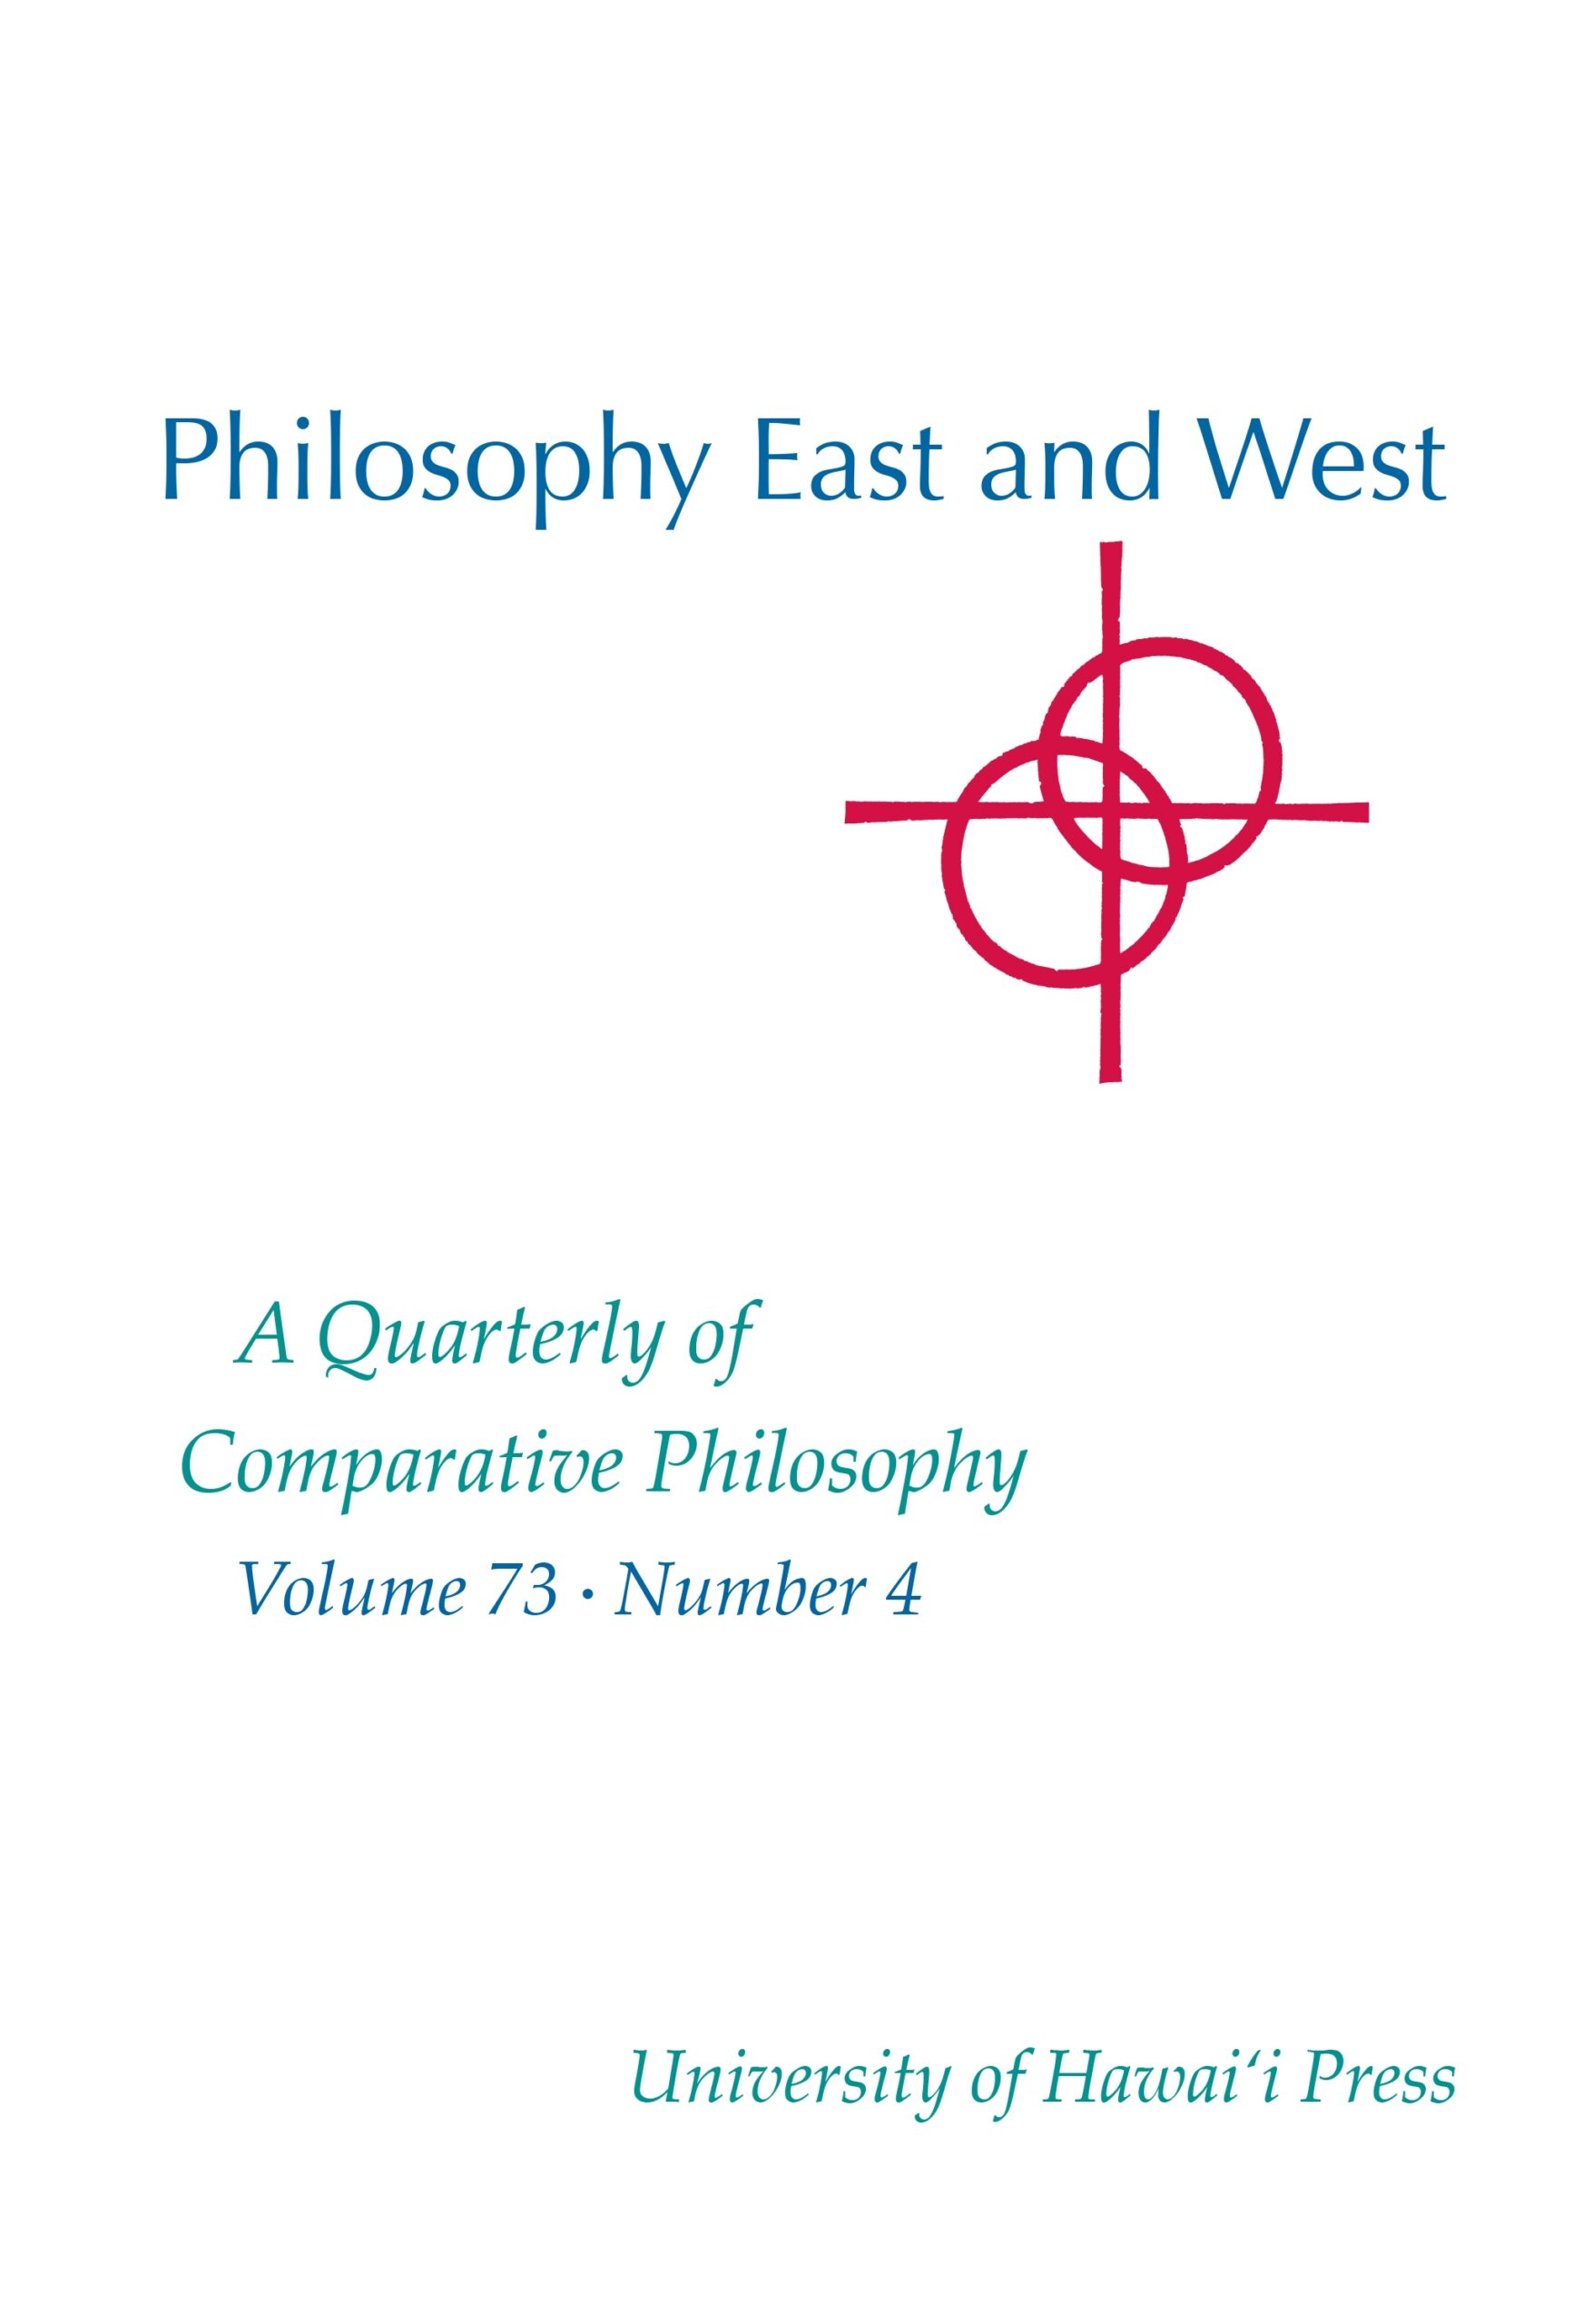 UH　–　of　East　Philosophy　A　Comparative　and　Quarterly　West:　Philosophy　Press